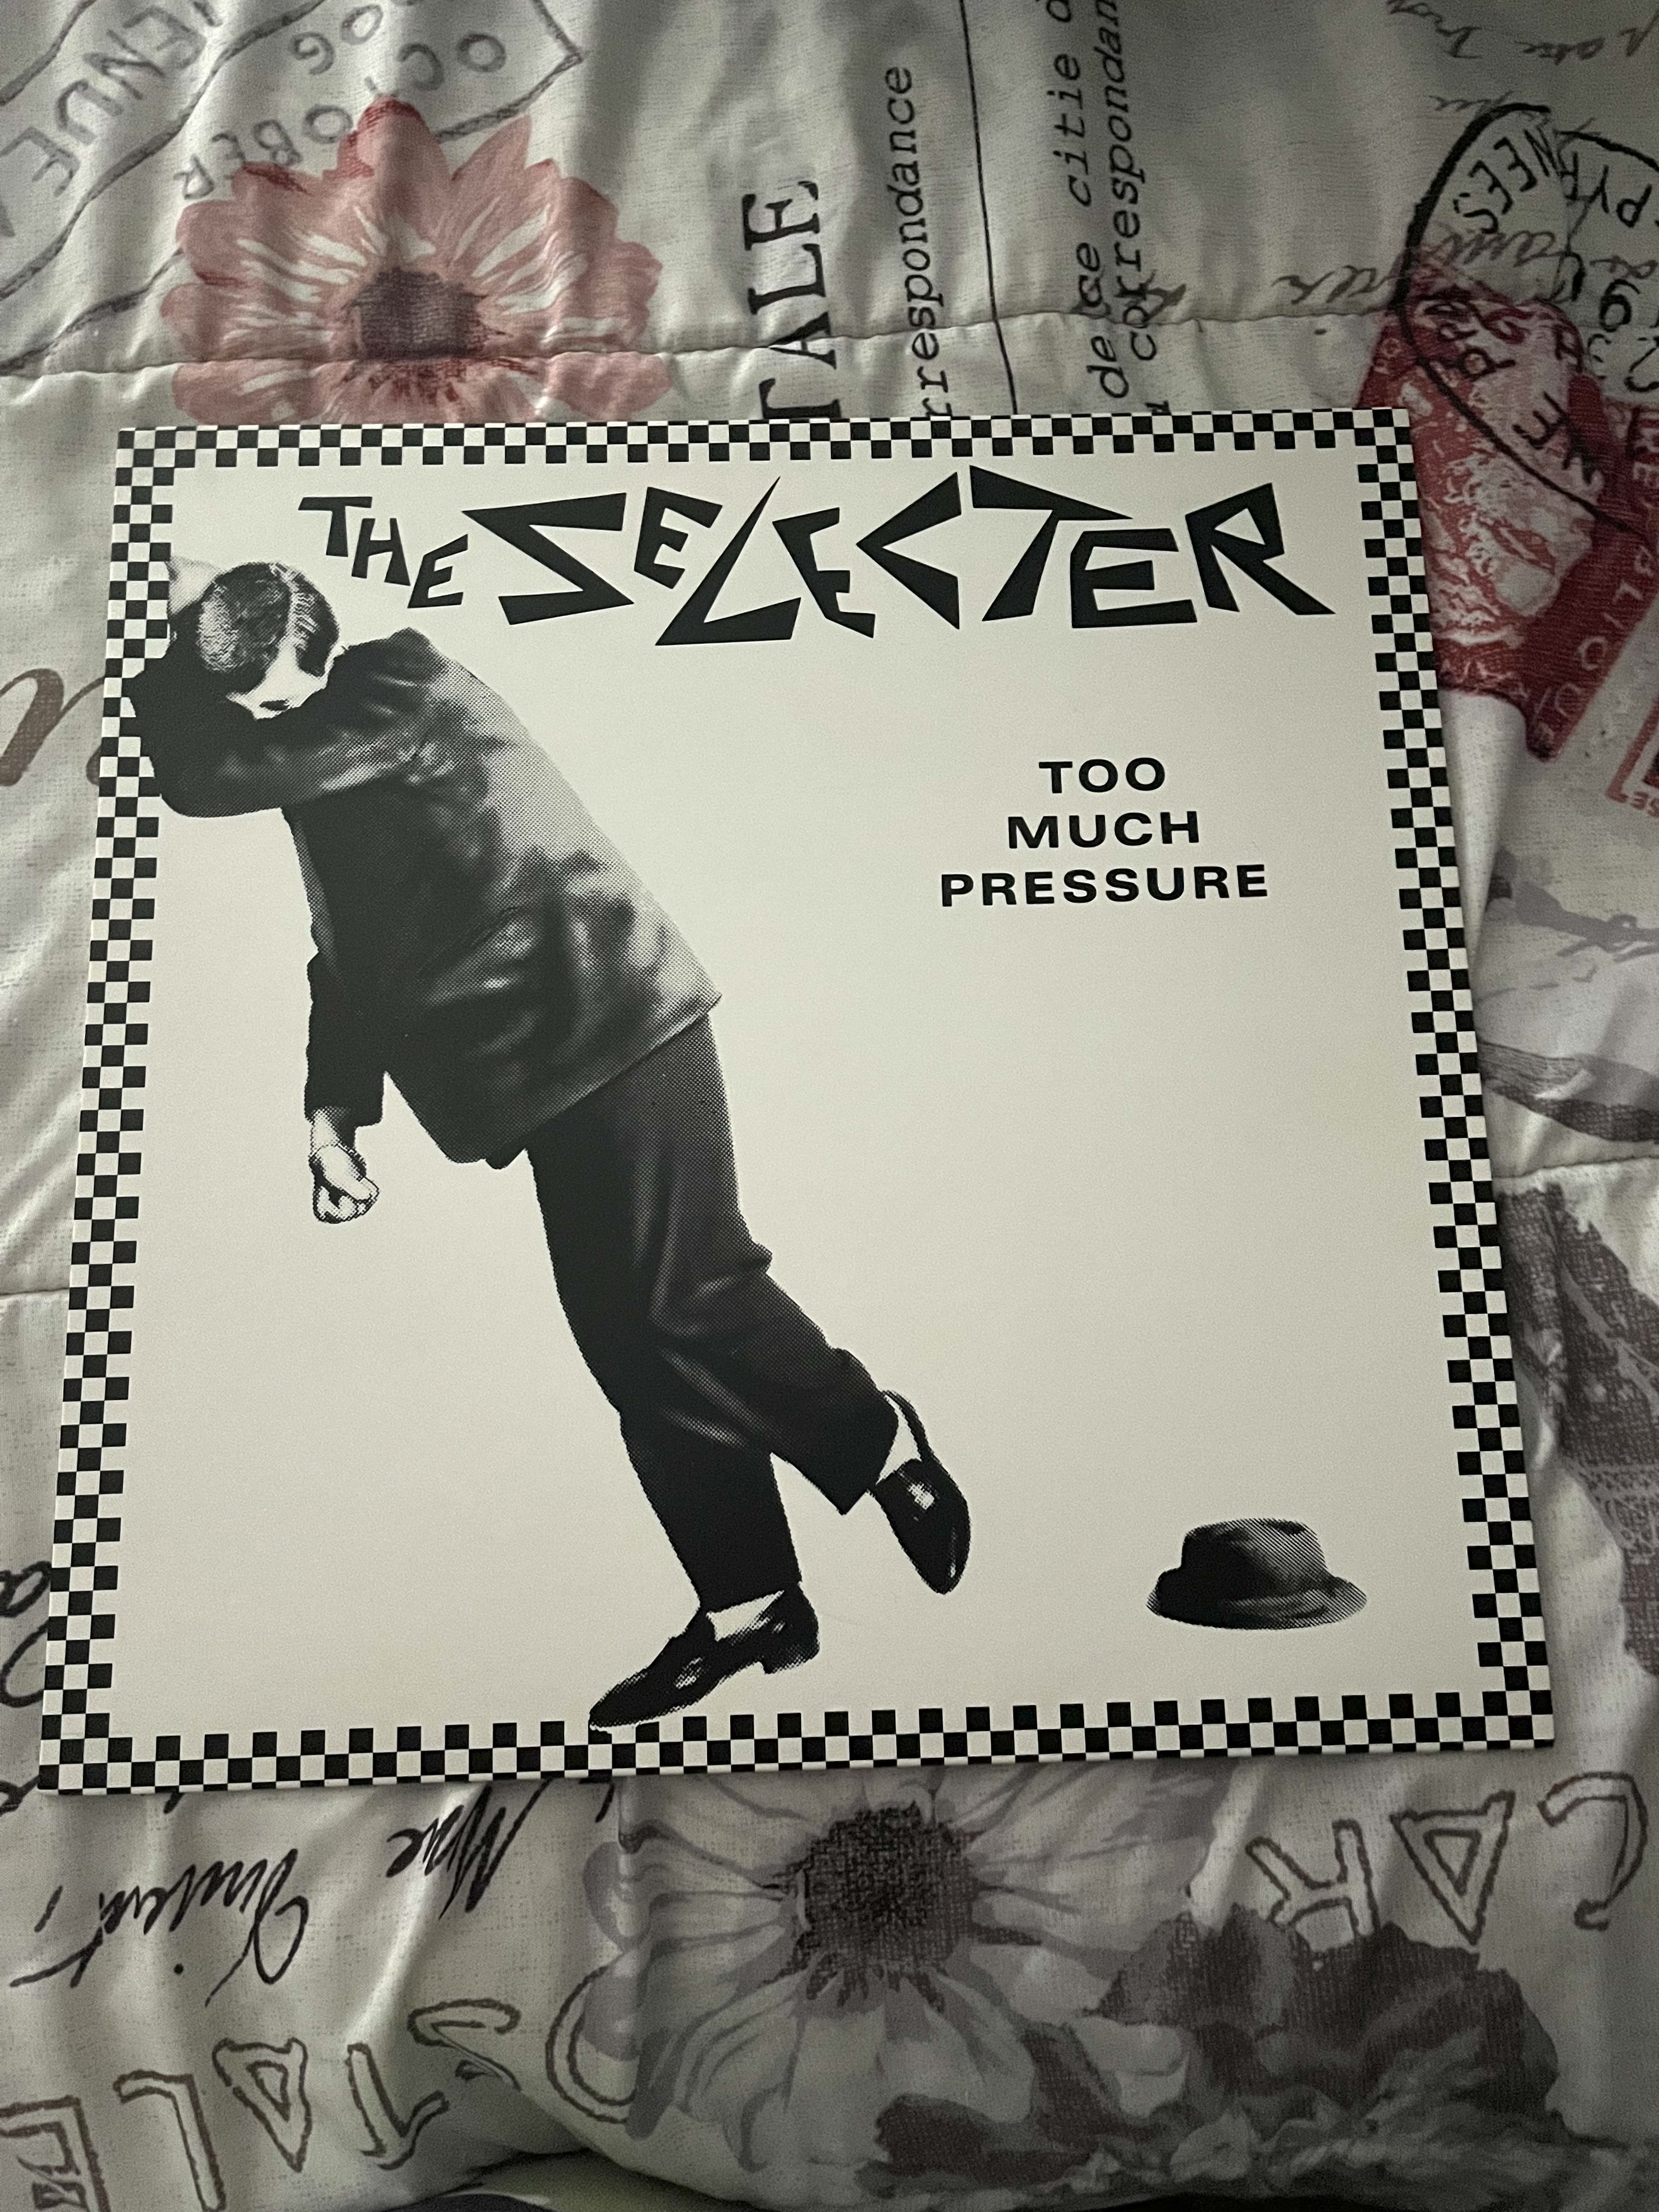 A picture of the vinyl Too Much Pressure by The Selecter